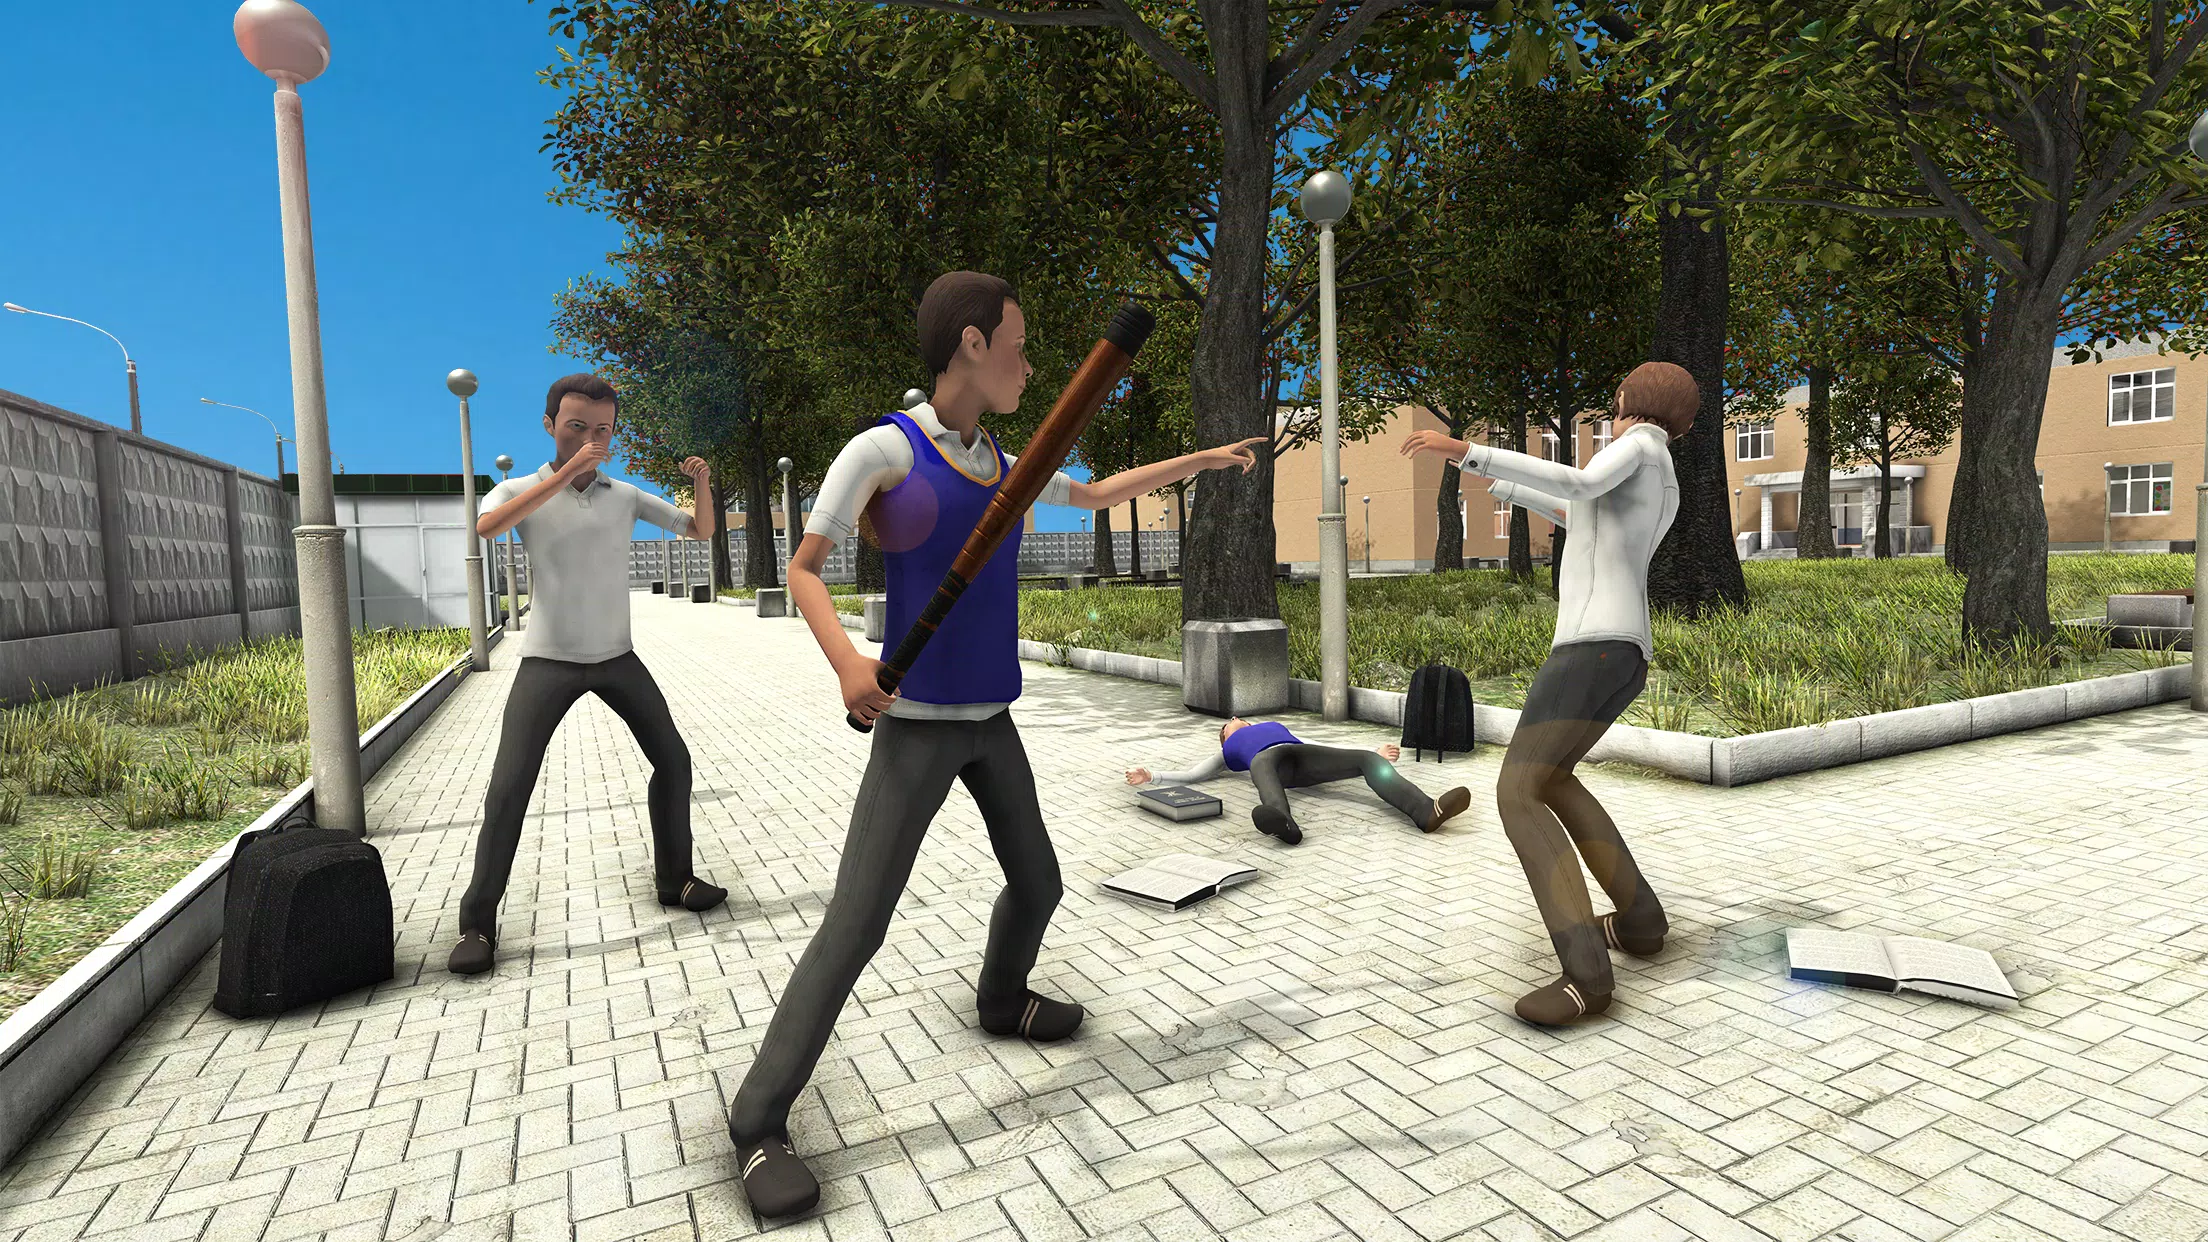 High School Bad Bully Guys APK for Android - Download